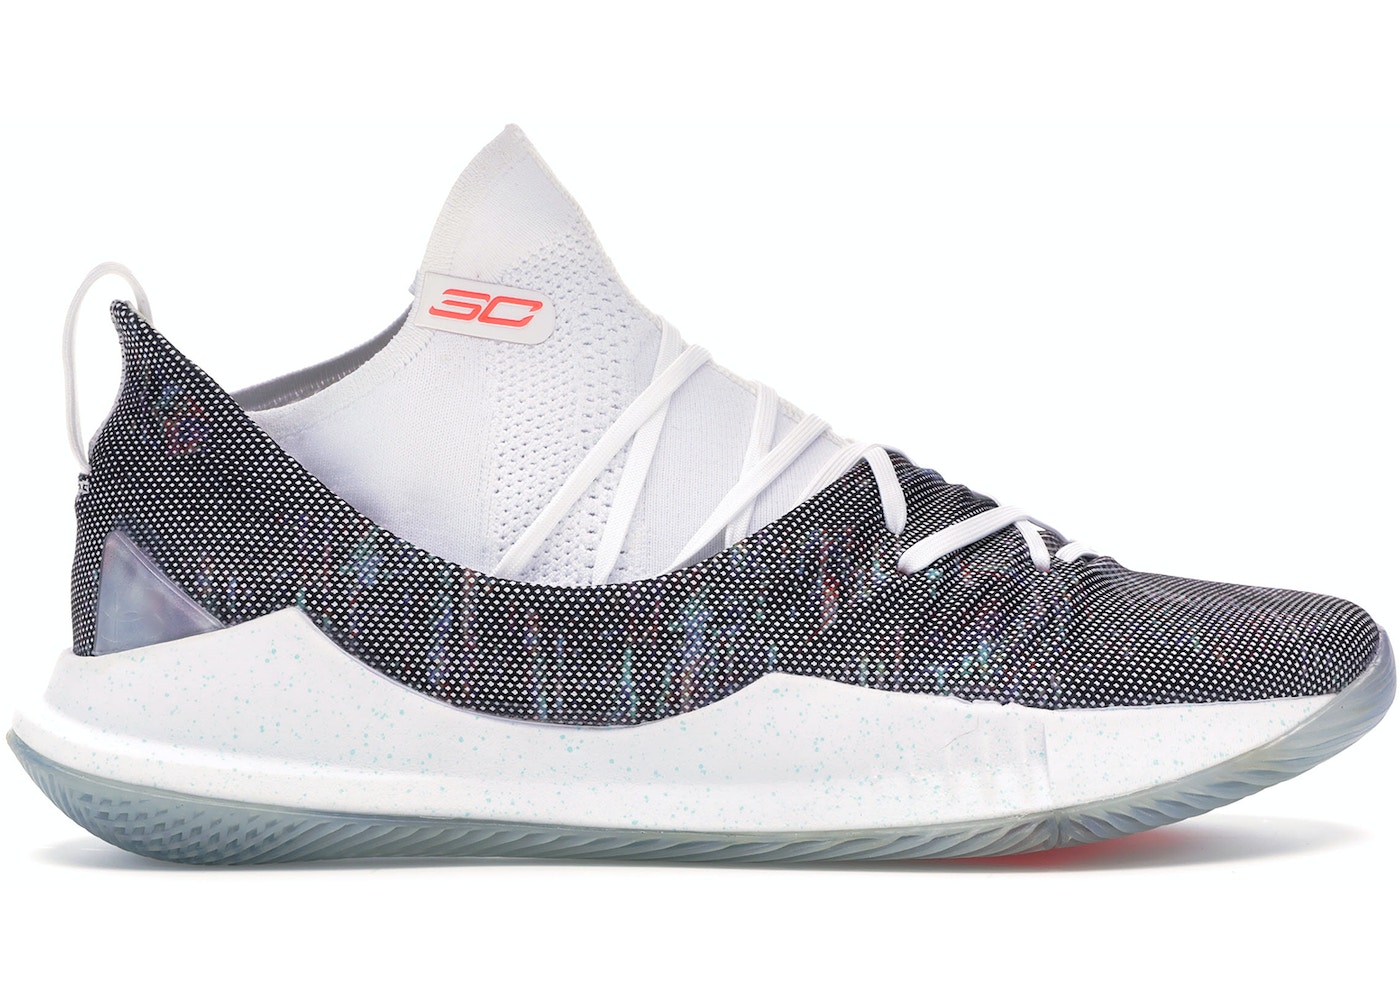 Under Armour Curry 5 Welcome Home - 3020657-107